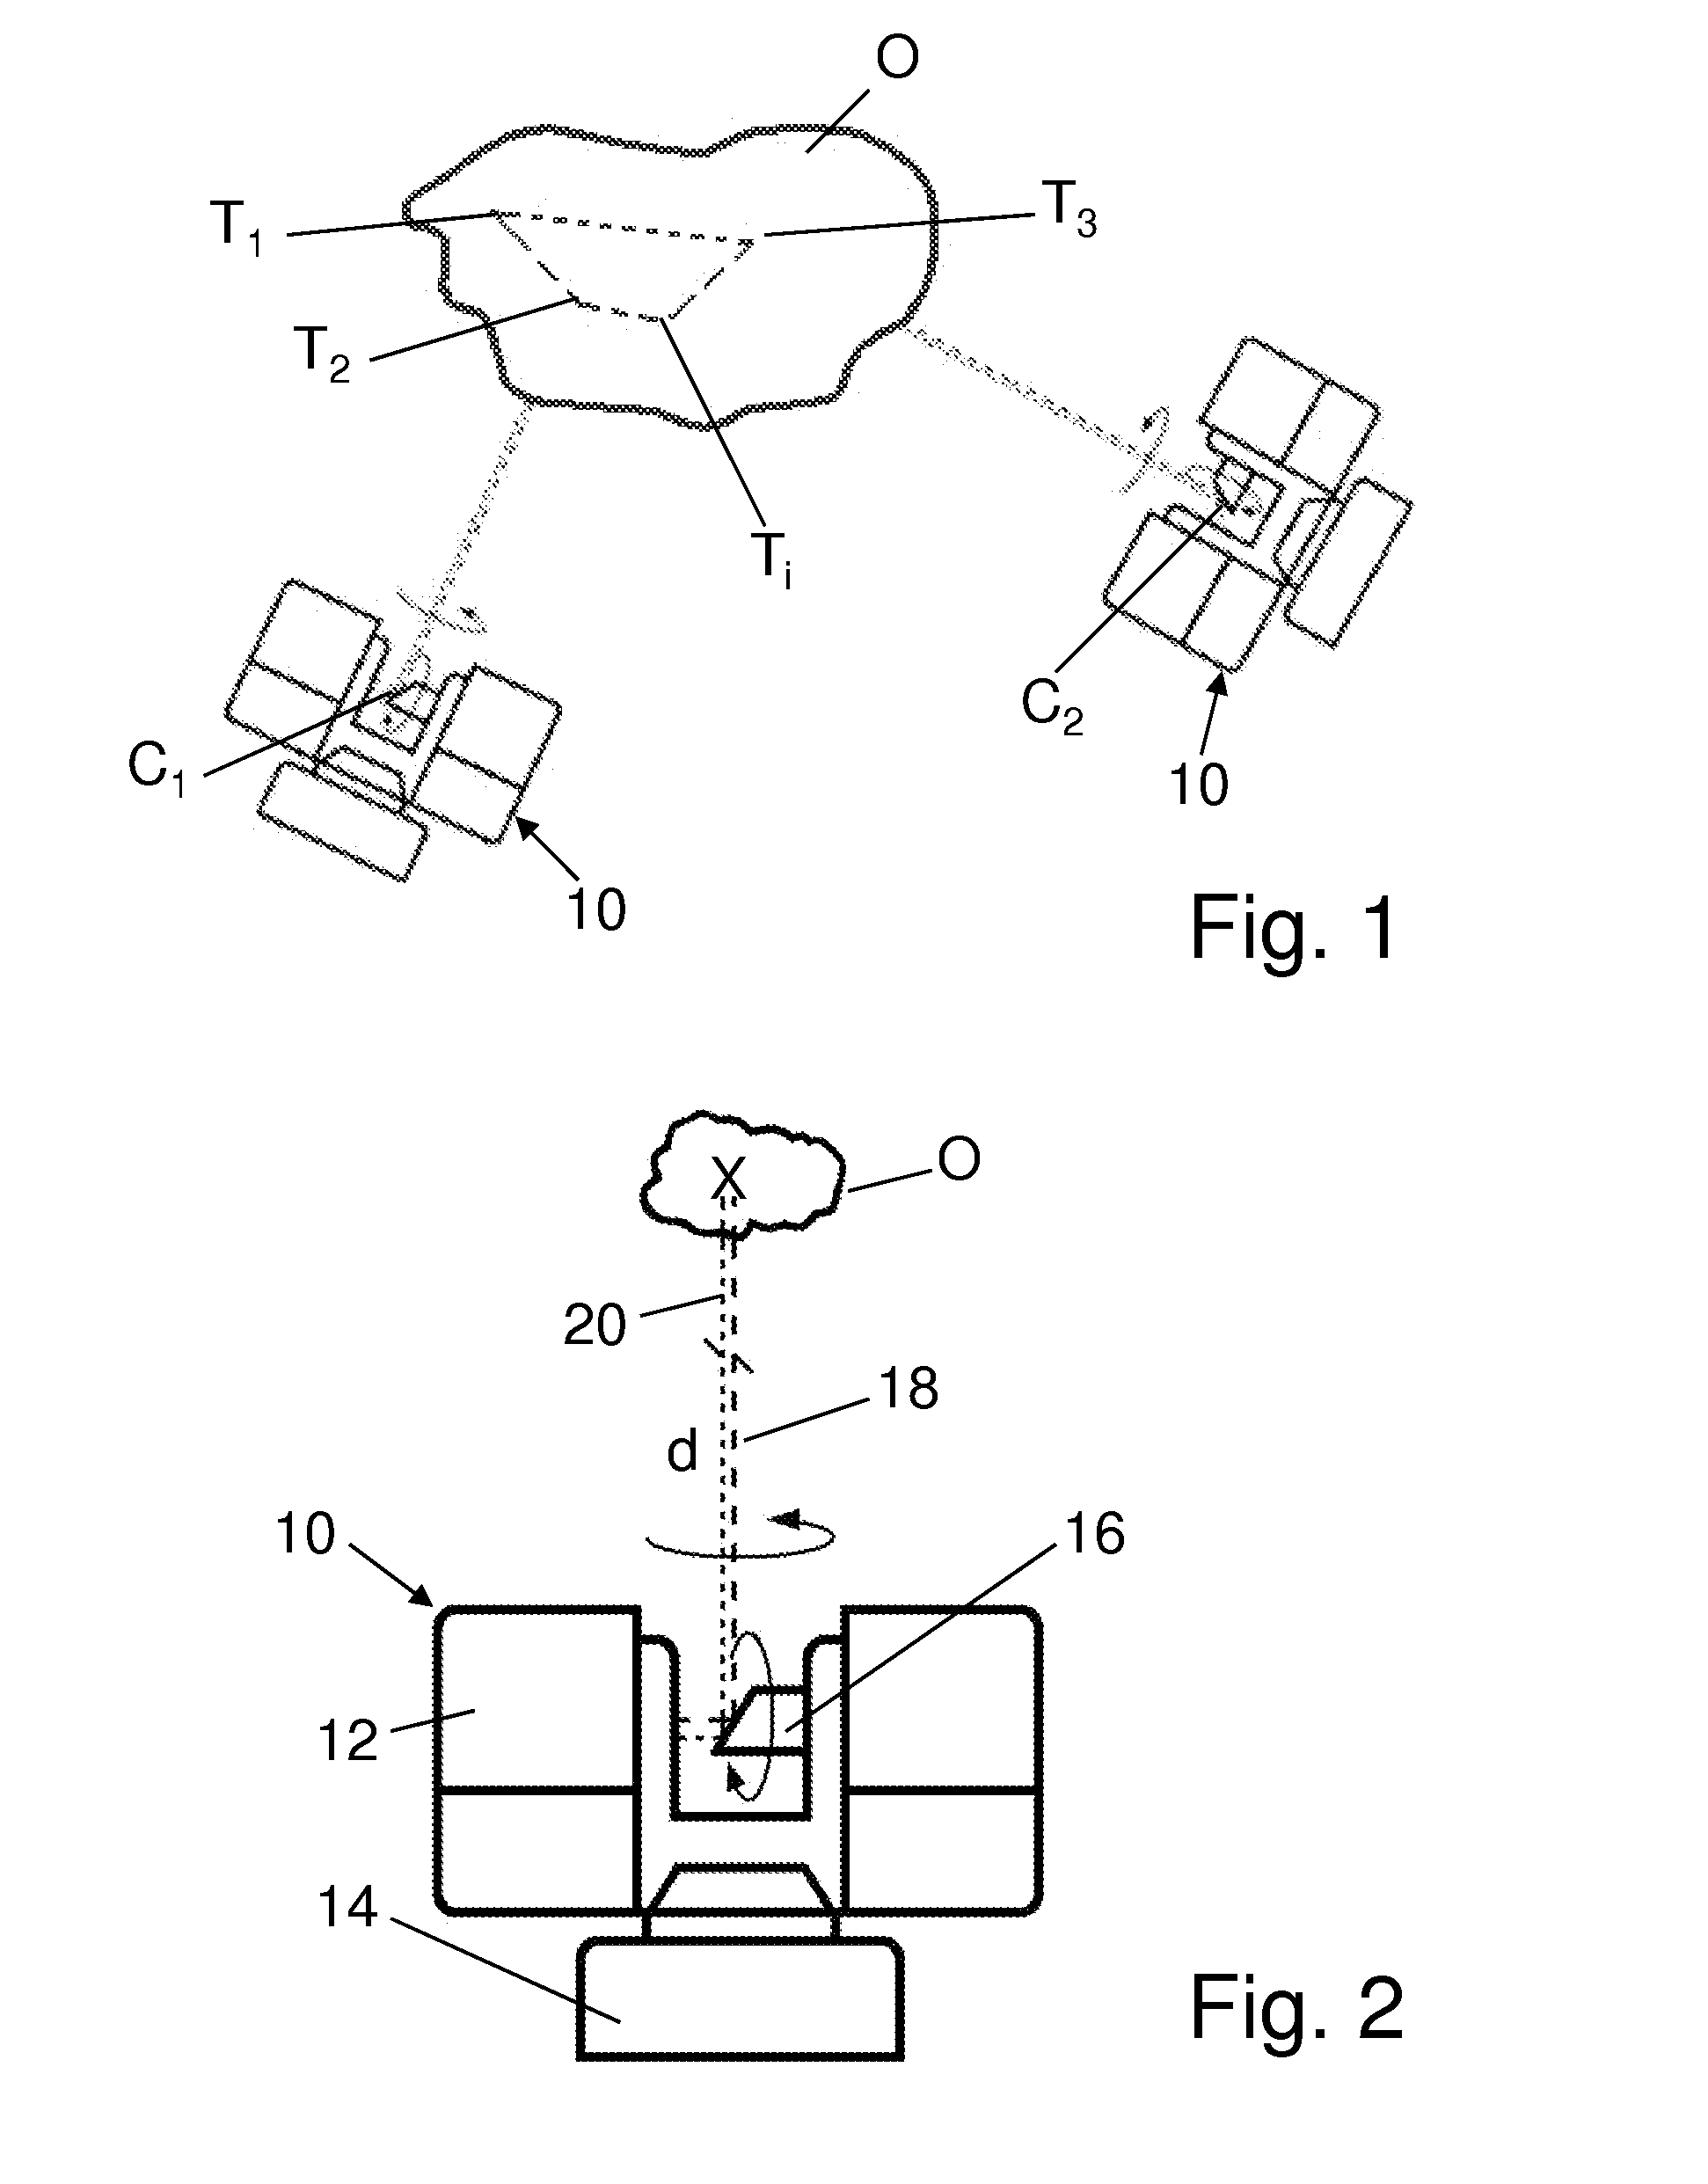 Method for optically scanning and measuring a scene